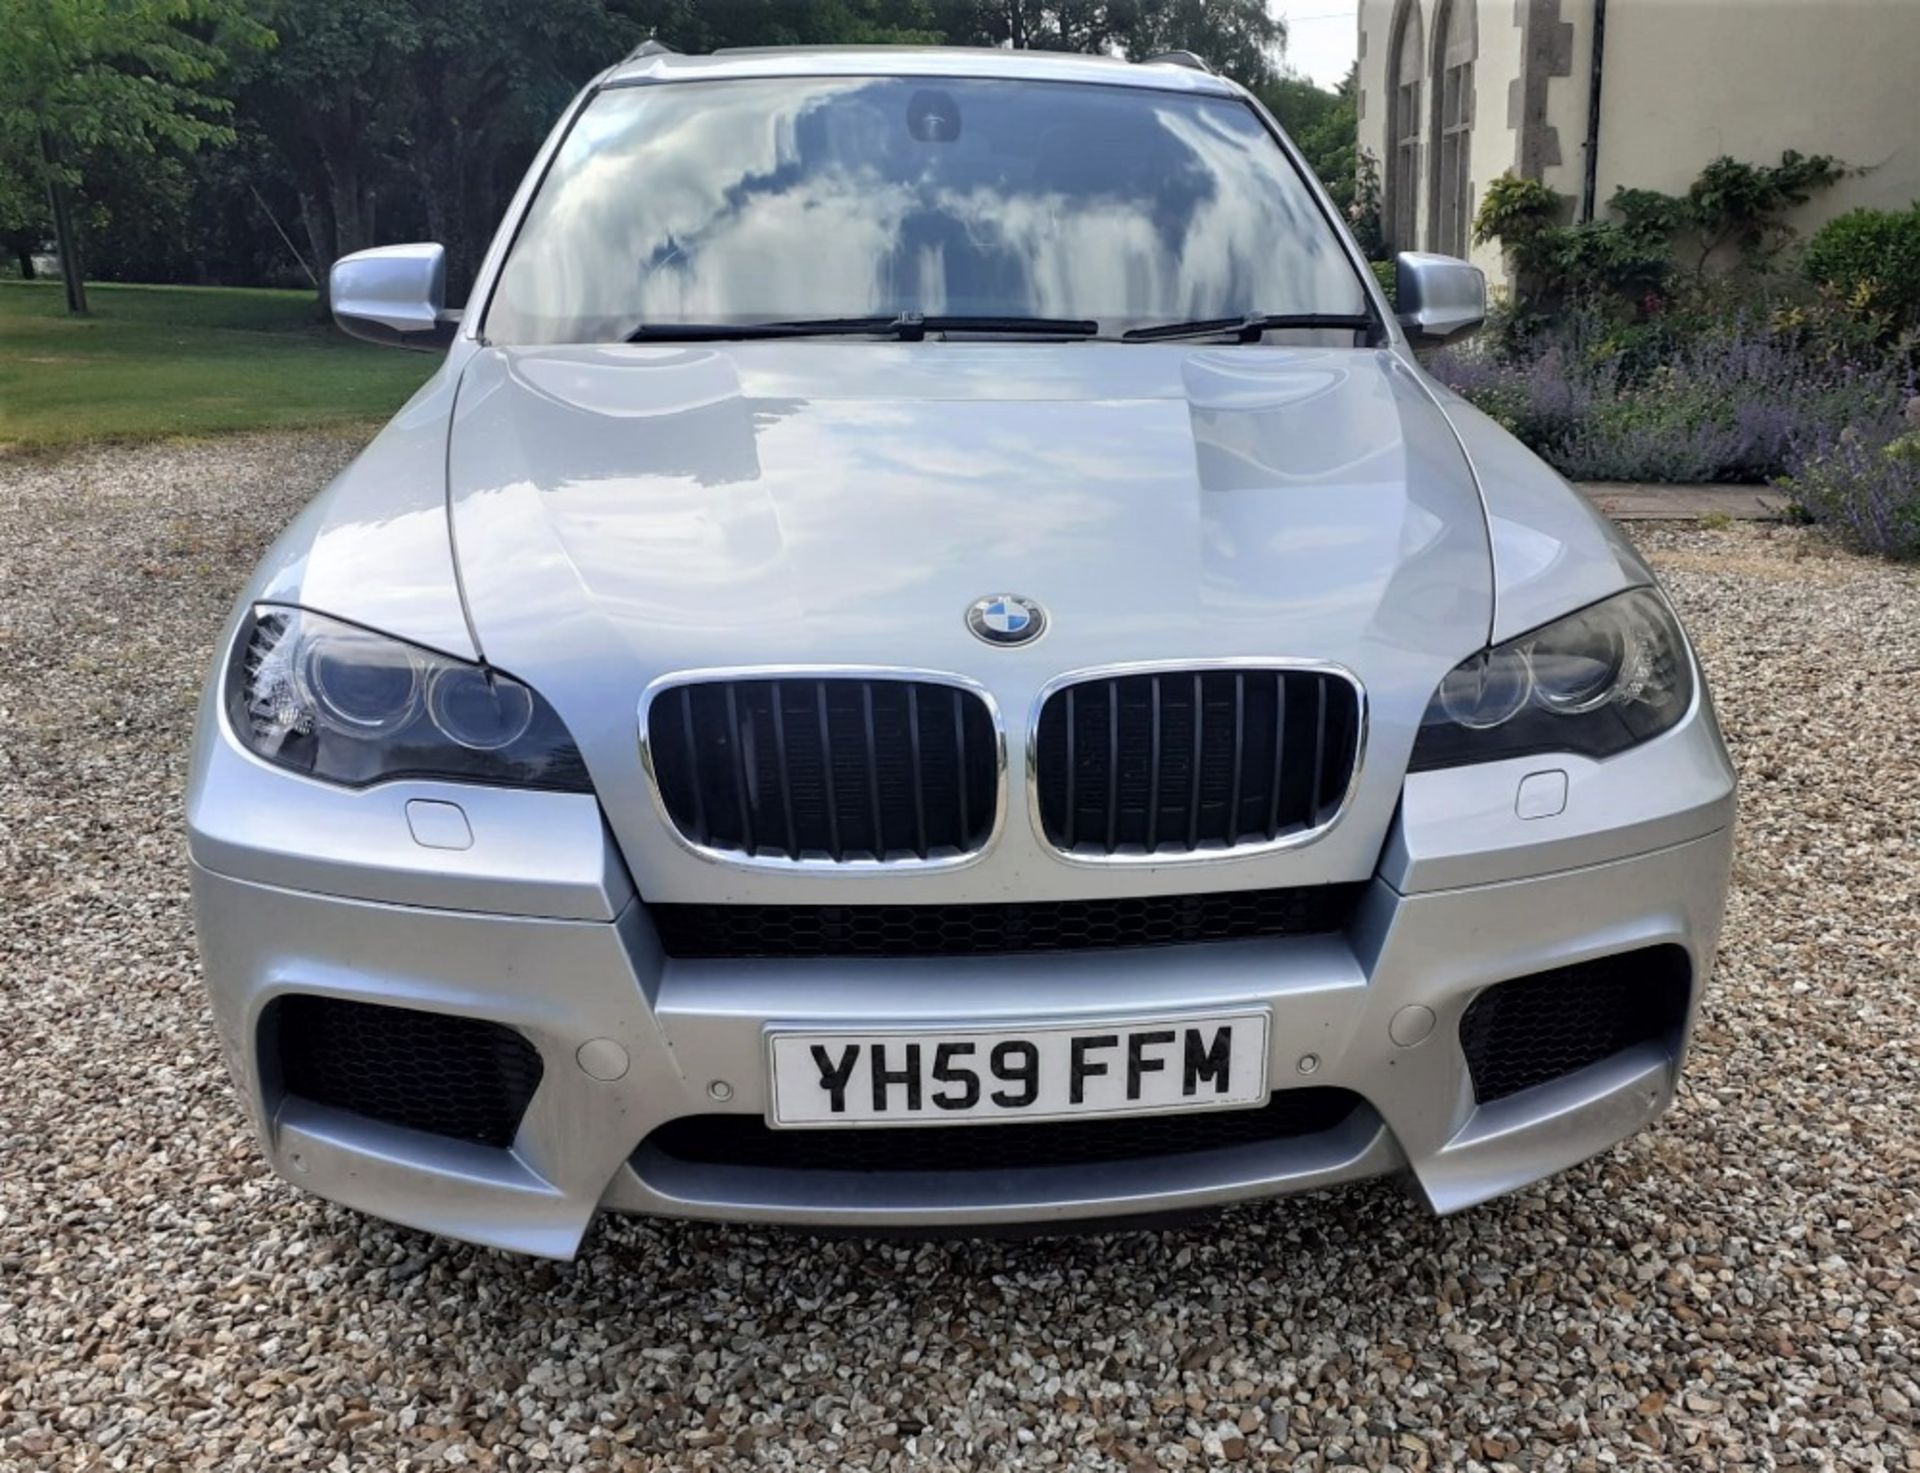 2009 BMW X5 M Registration Number:YH59 FFM Chassis Number: TBA Recorded Mileage: 125,000 miles - Two - Bild 3 aus 17